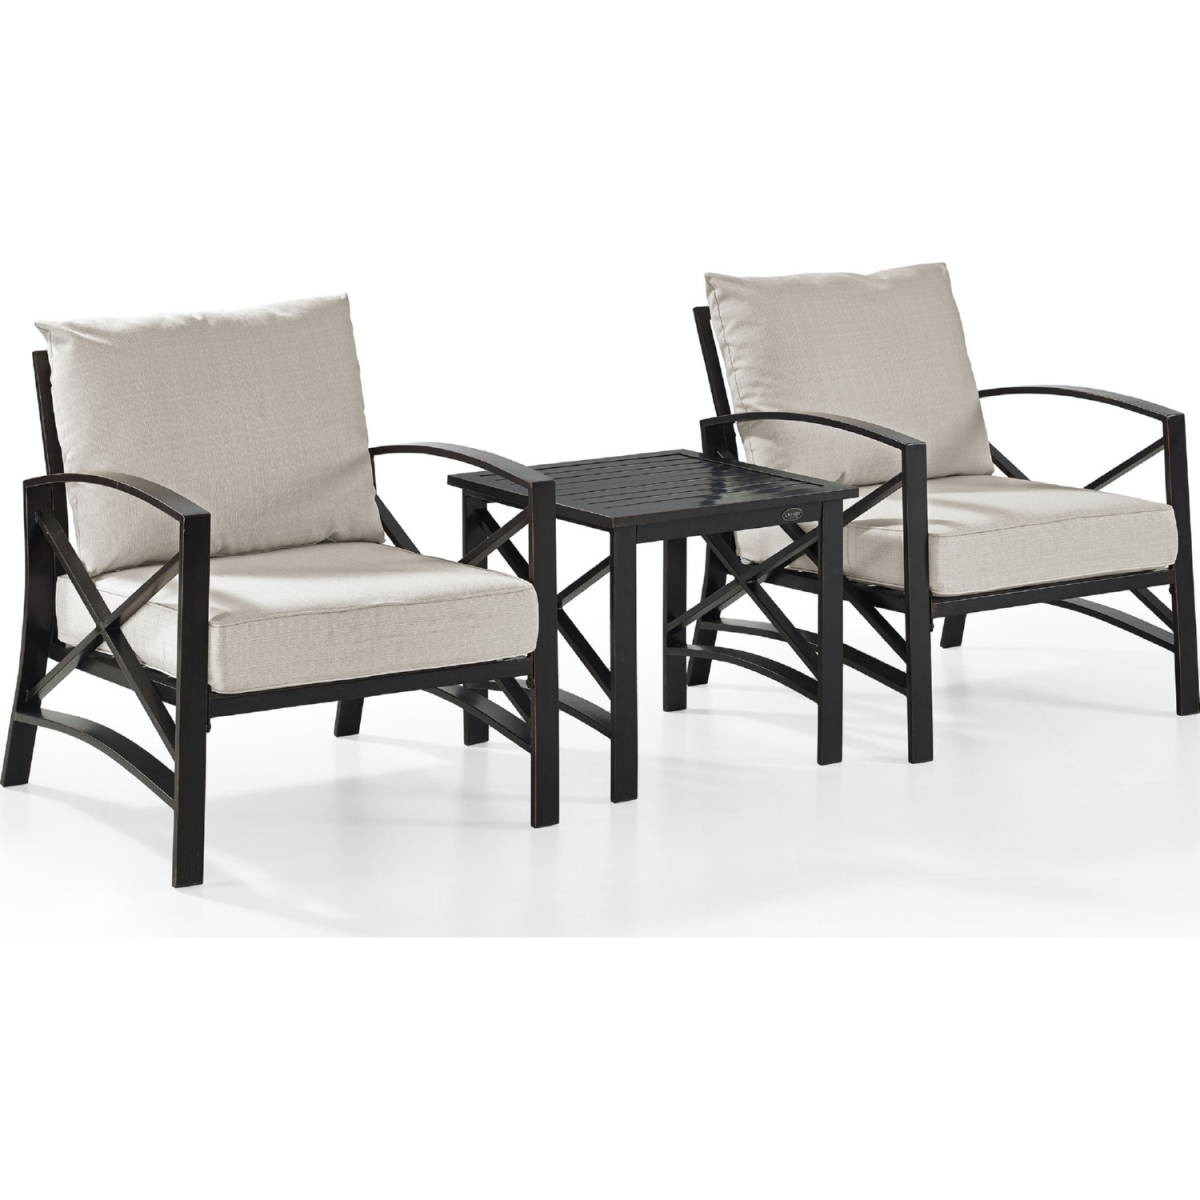 TEMPLETON 3 Piece Kaplan Outdoor Seating Set with Oatmeal Cushion - Two Chairs, Side Table